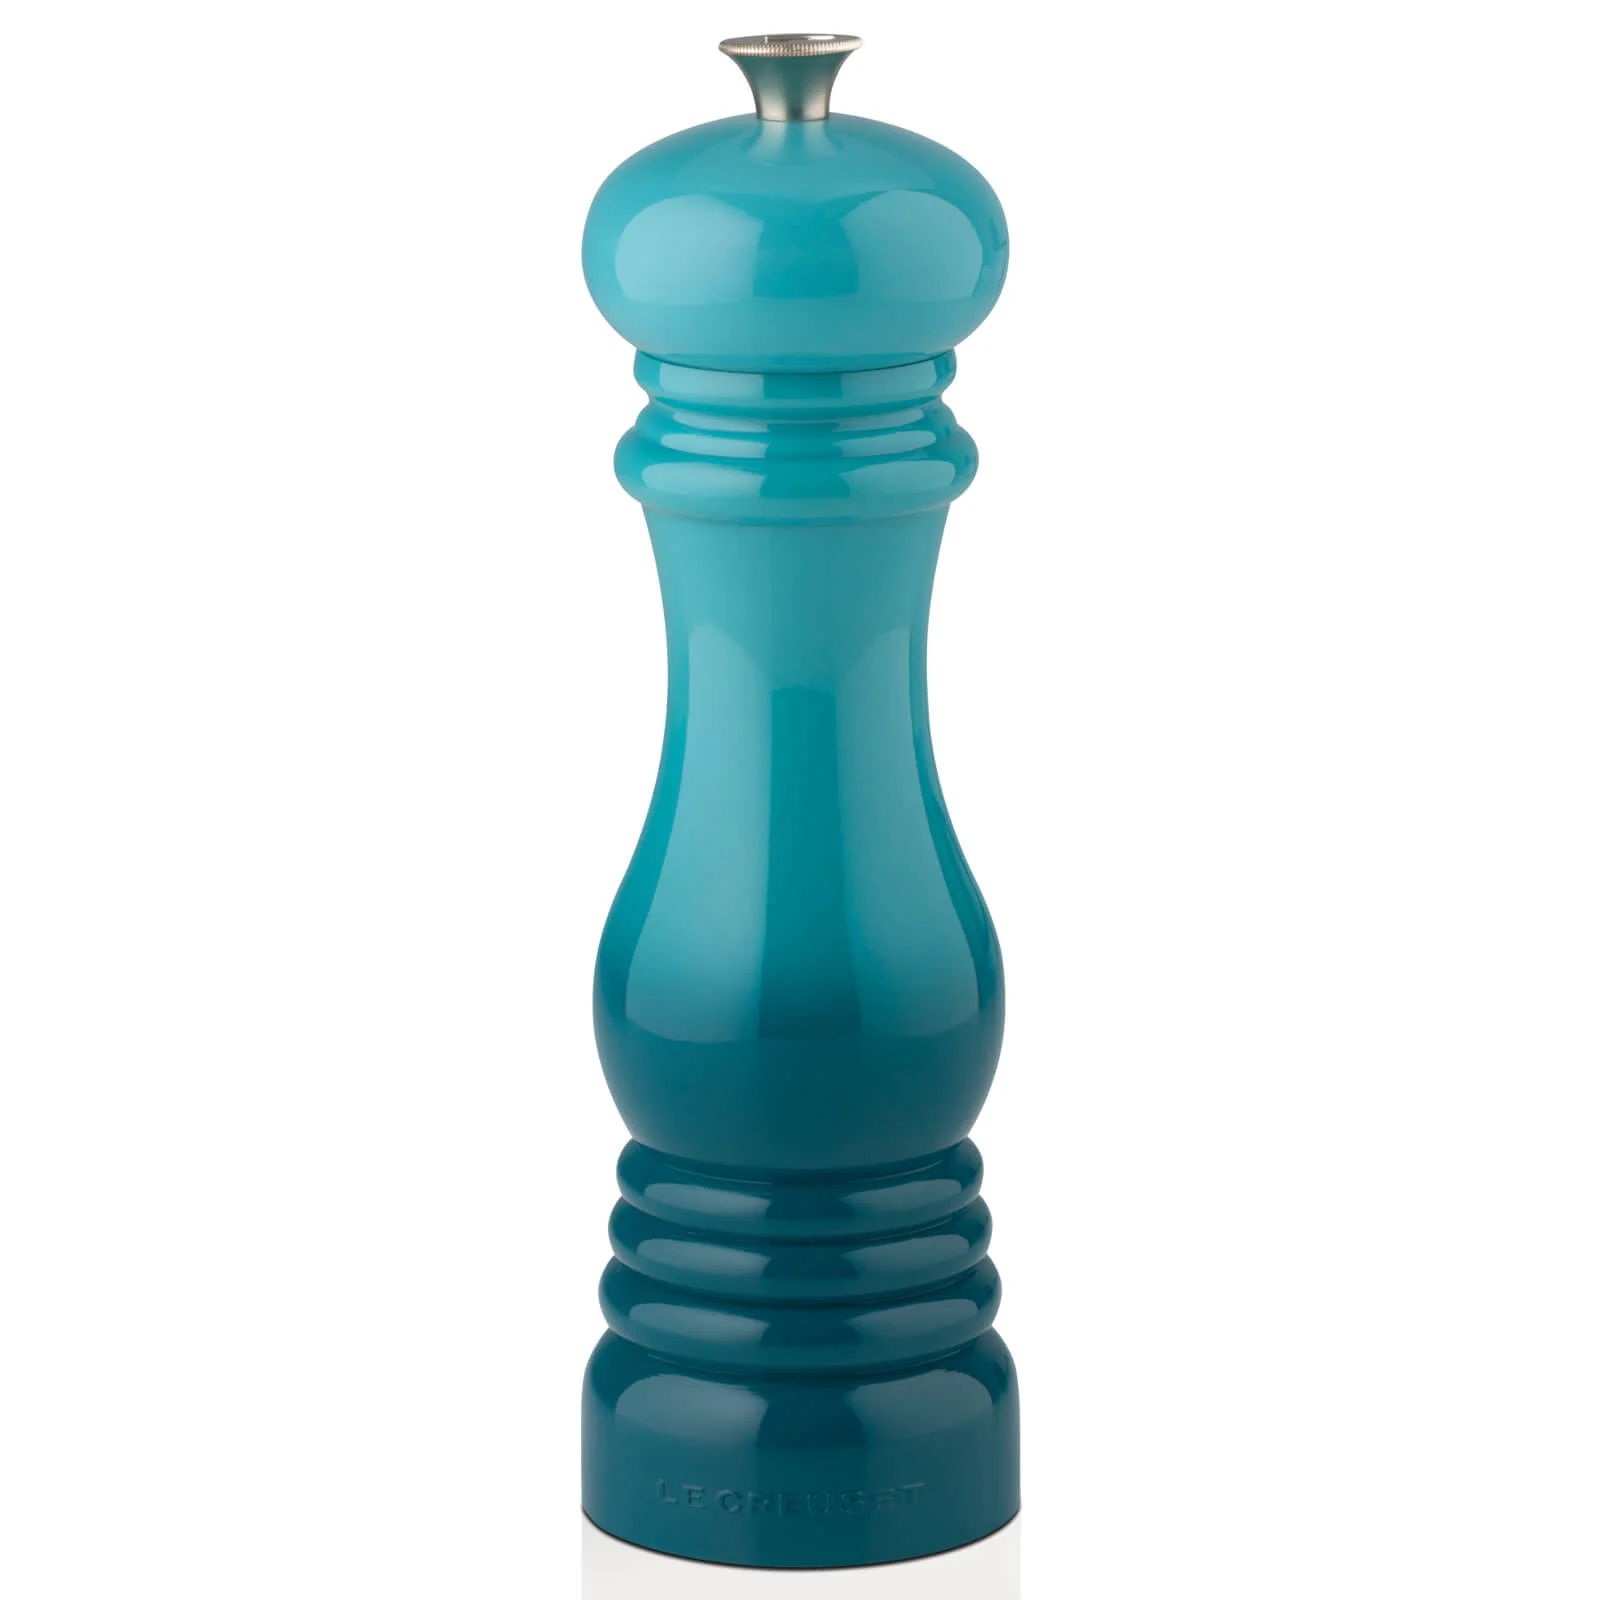 Le Creuset Classic Pepper Mill - Teal Image 1